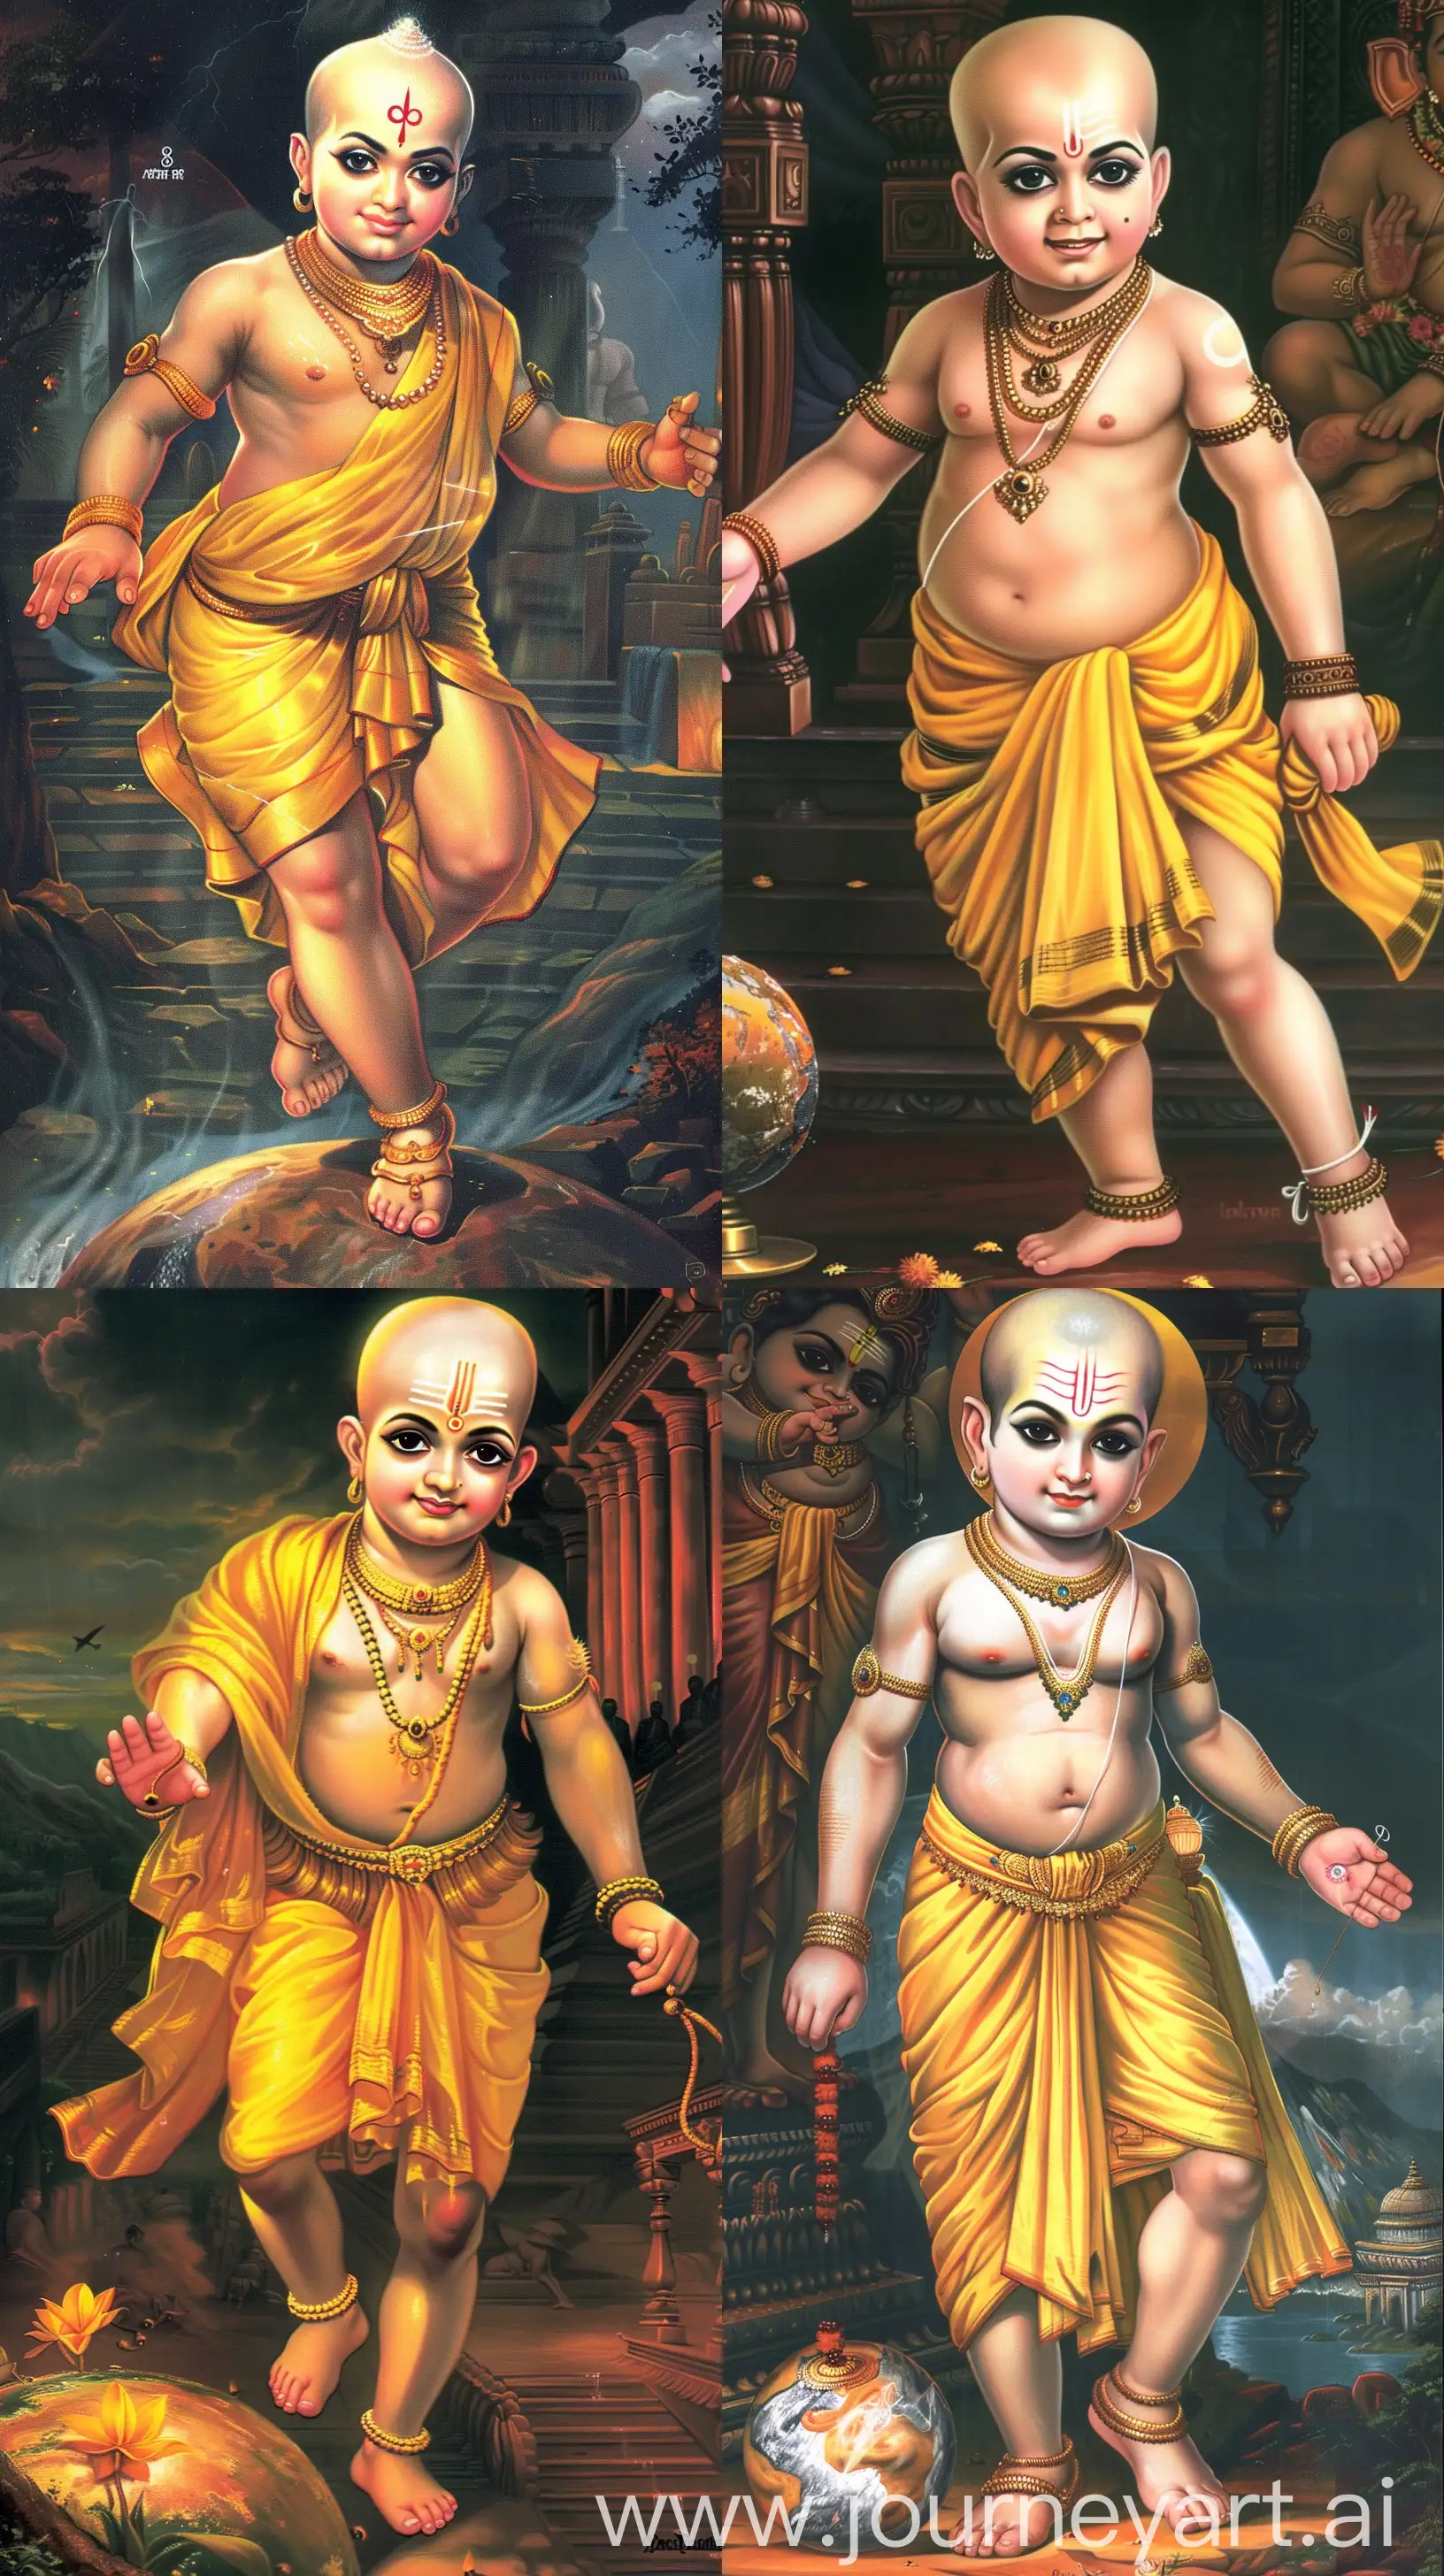 Raj Ravi Varma art style image of Vaman avatar from Hinduism, as a short Statured young Brahman in yellow attire, bald and no beard, little chubby, he's as big as a cosmos, one foot on the earth, from ancient Indian times, intricate details, 8k image --ar 9:16 --sref https://i.postimg.cc/6qZWsf2W/1382972979-vaman-avatar.jpg --v 6